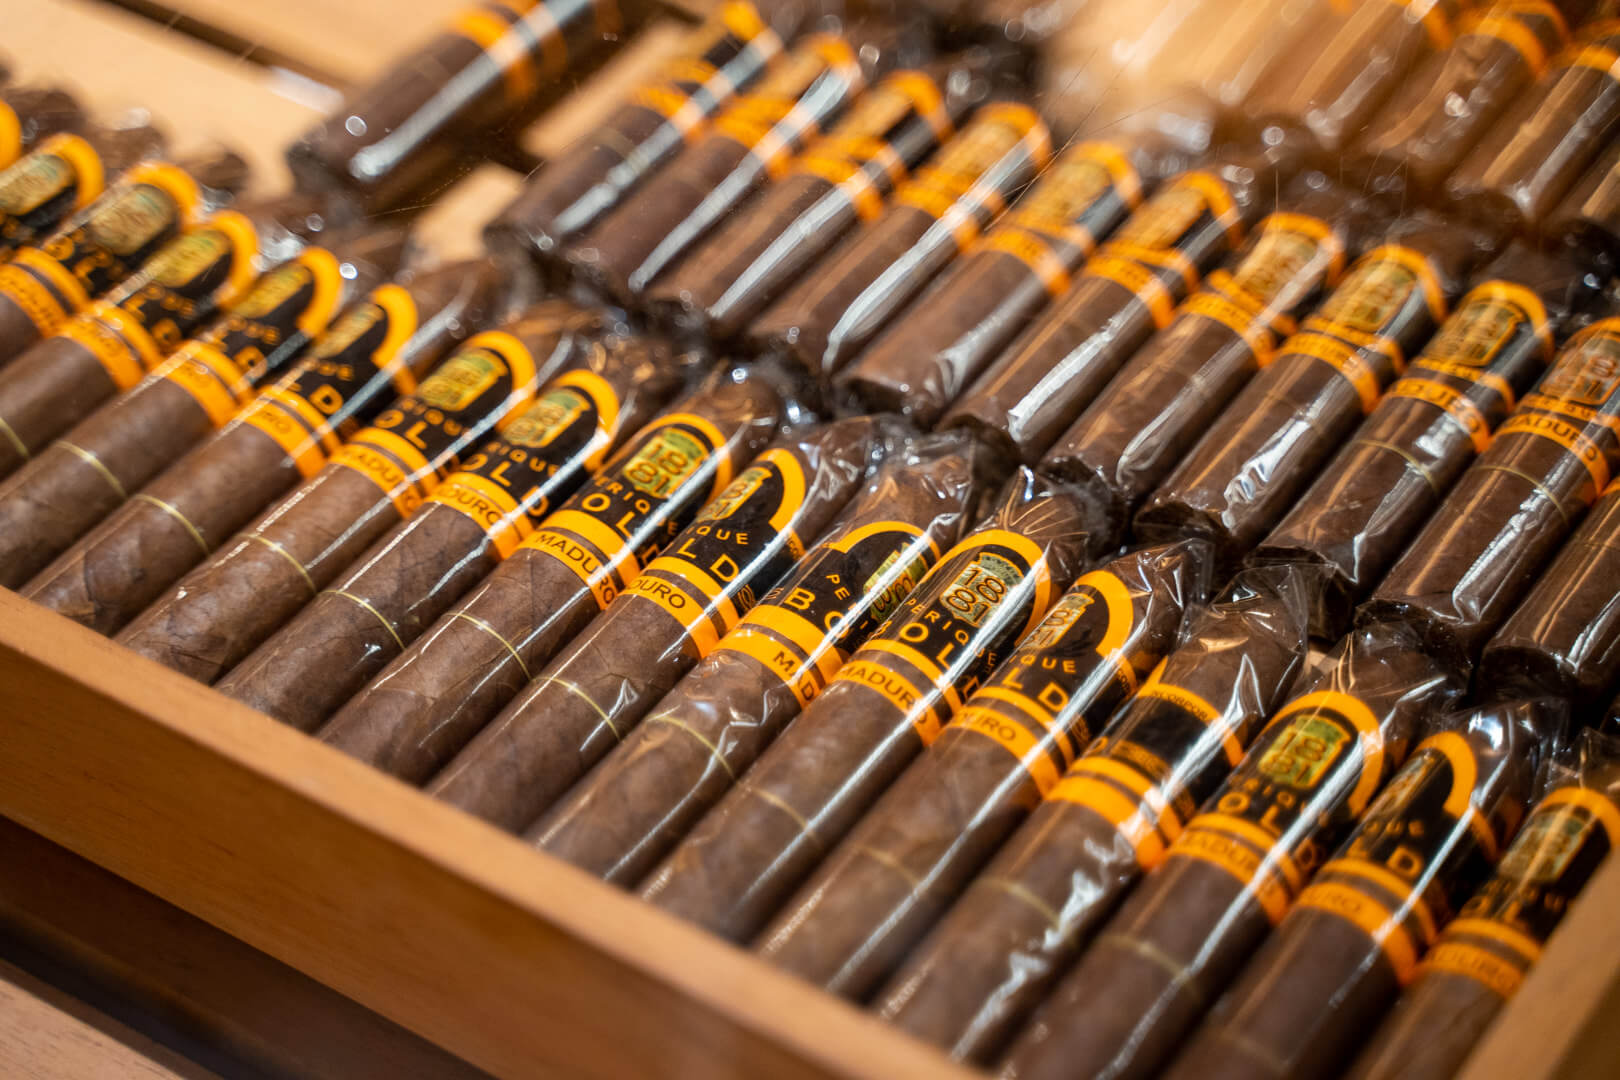 A selection of 1881 Perique cigars